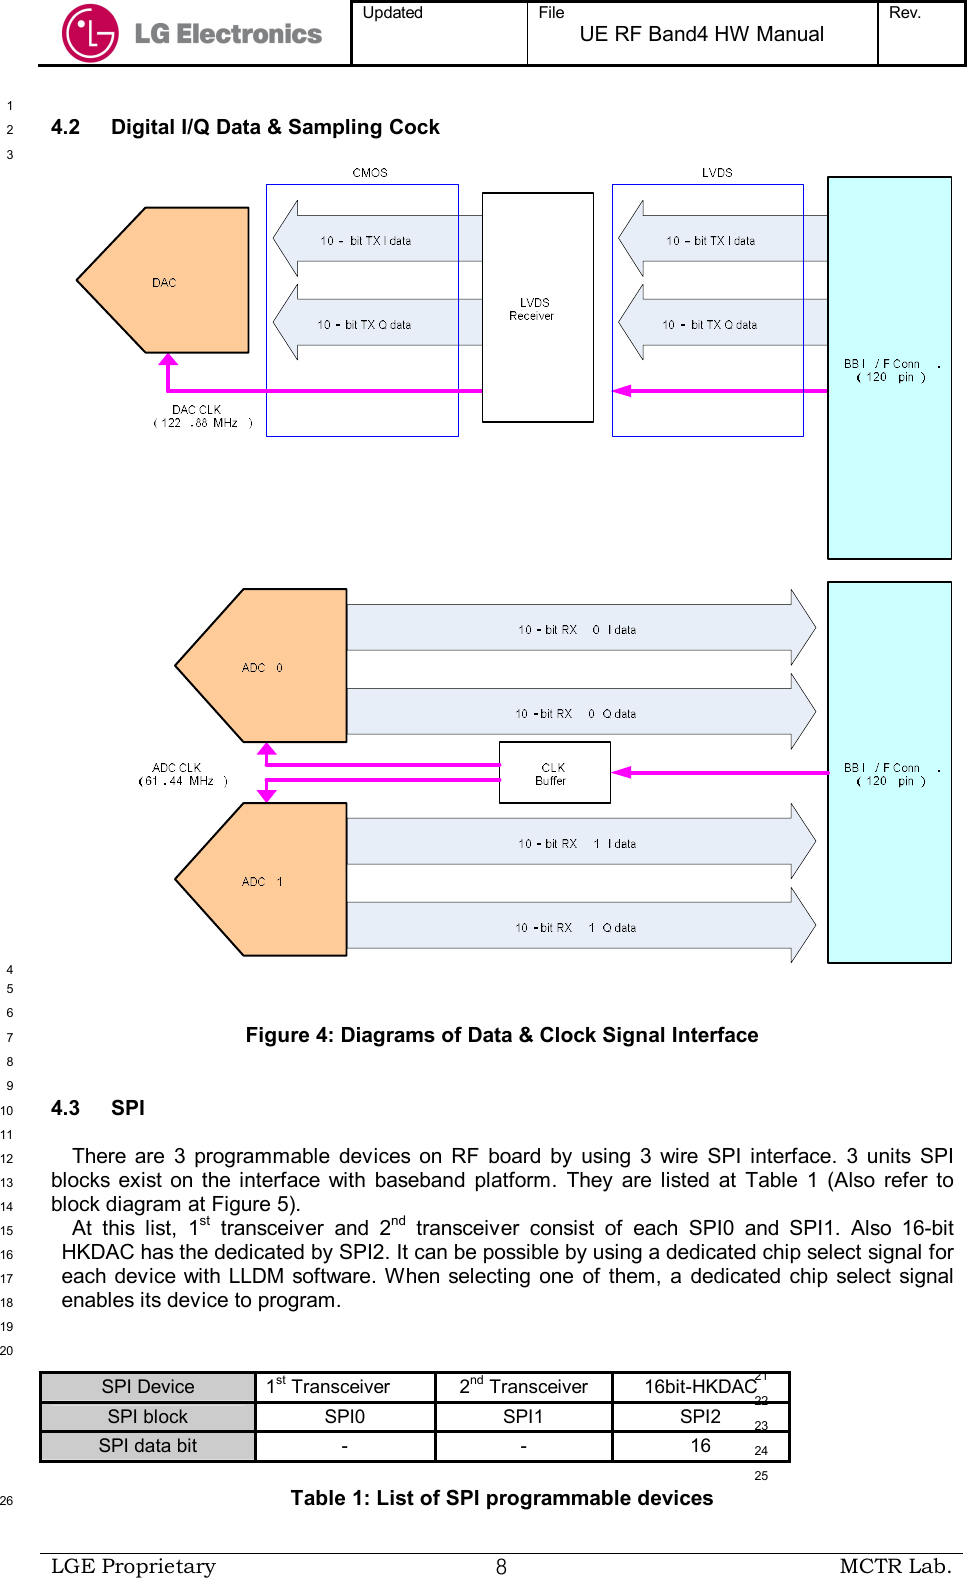  Updated  File UE RF Band4 HW Manual Rev.    LGE Proprietary  ８ MCTR Lab.   1 4.2  Digital I/Q Data &amp; Sampling Cock 2  3 4  5  6 Figure 4: Diagrams of Data &amp; Clock Signal Interface 7  8  9 4.3  SPI 10  11 There are  3  programmable  devices  on  RF  board  by  using  3  wire  SPI  interface.  3  units  SPI 12 blocks exist on  the  interface with  baseband  platform.  They  are  listed  at  Table  1  (Also  refer  to 13 block diagram at Figure 5). 14 At  this  list,  1st  transceiver  and  2nd  transceiver  consist  of  each  SPI0  and  SPI1.  Also  16-bit 15 HKDAC has the dedicated by SPI2. It can be possible by using a dedicated chip select signal for 16 each device with LLDM  software. When selecting  one  of  them,  a  dedicated  chip select  signal 17 enables its device to program.  18  19  20  21  22  23  24  25 Table 1: List of SPI programmable devices 26 SPI Device  1st Transceiver  2nd Transceiver  16bit-HKDAC SPI block  SPI0  SPI1  SPI2 SPI data bit  -  -  16 